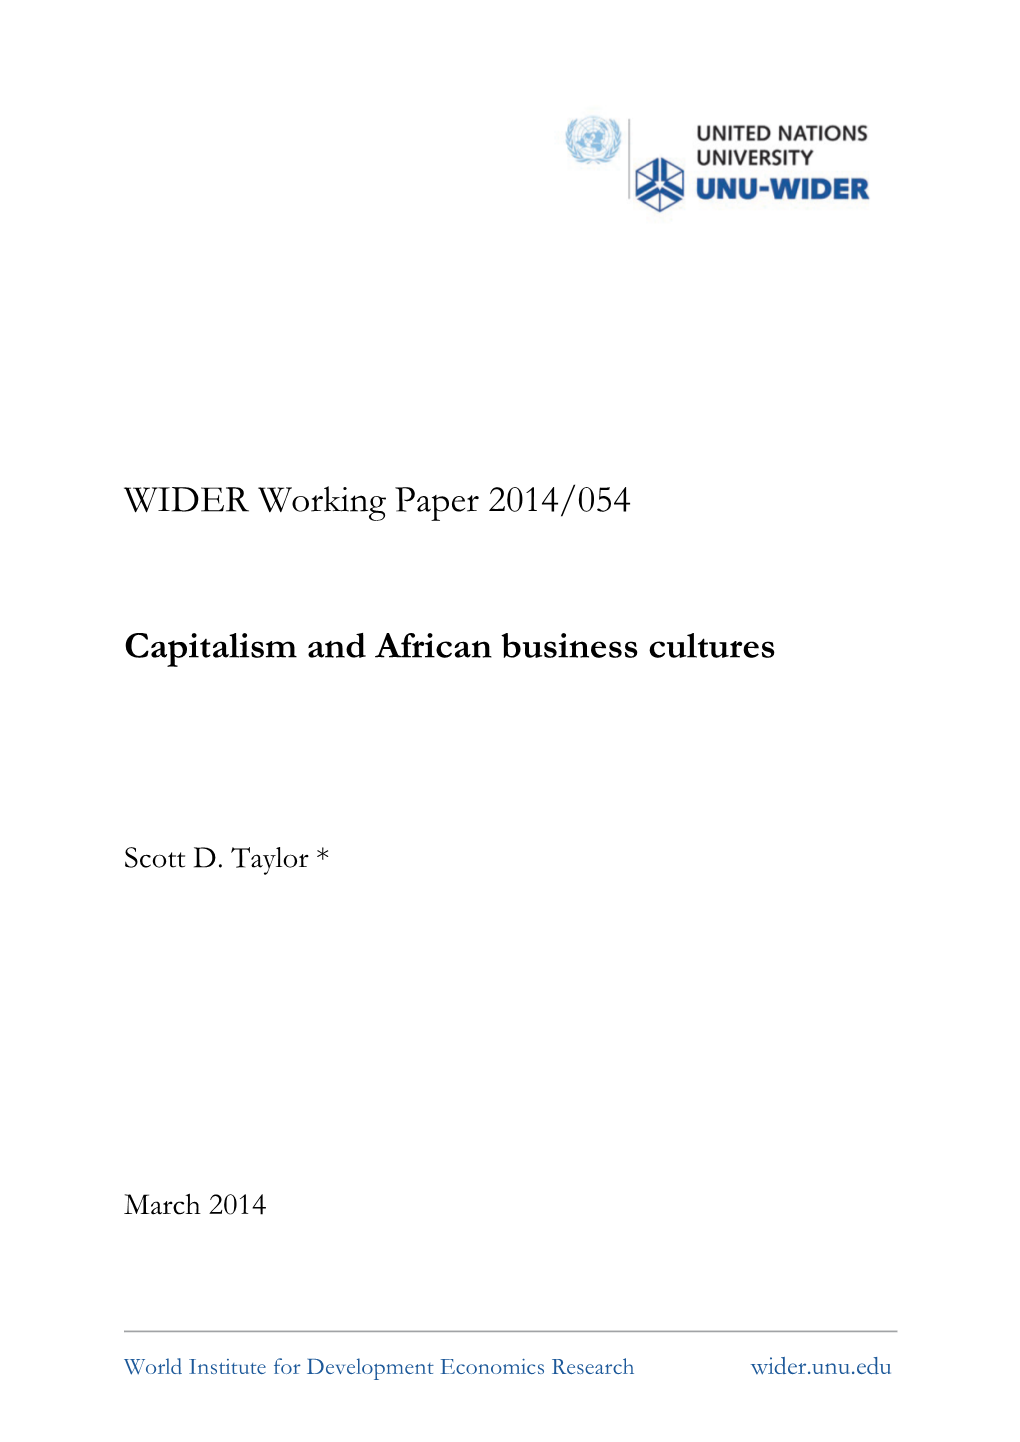 WIDER Working Paper 2014/054 Capitalism and African Business